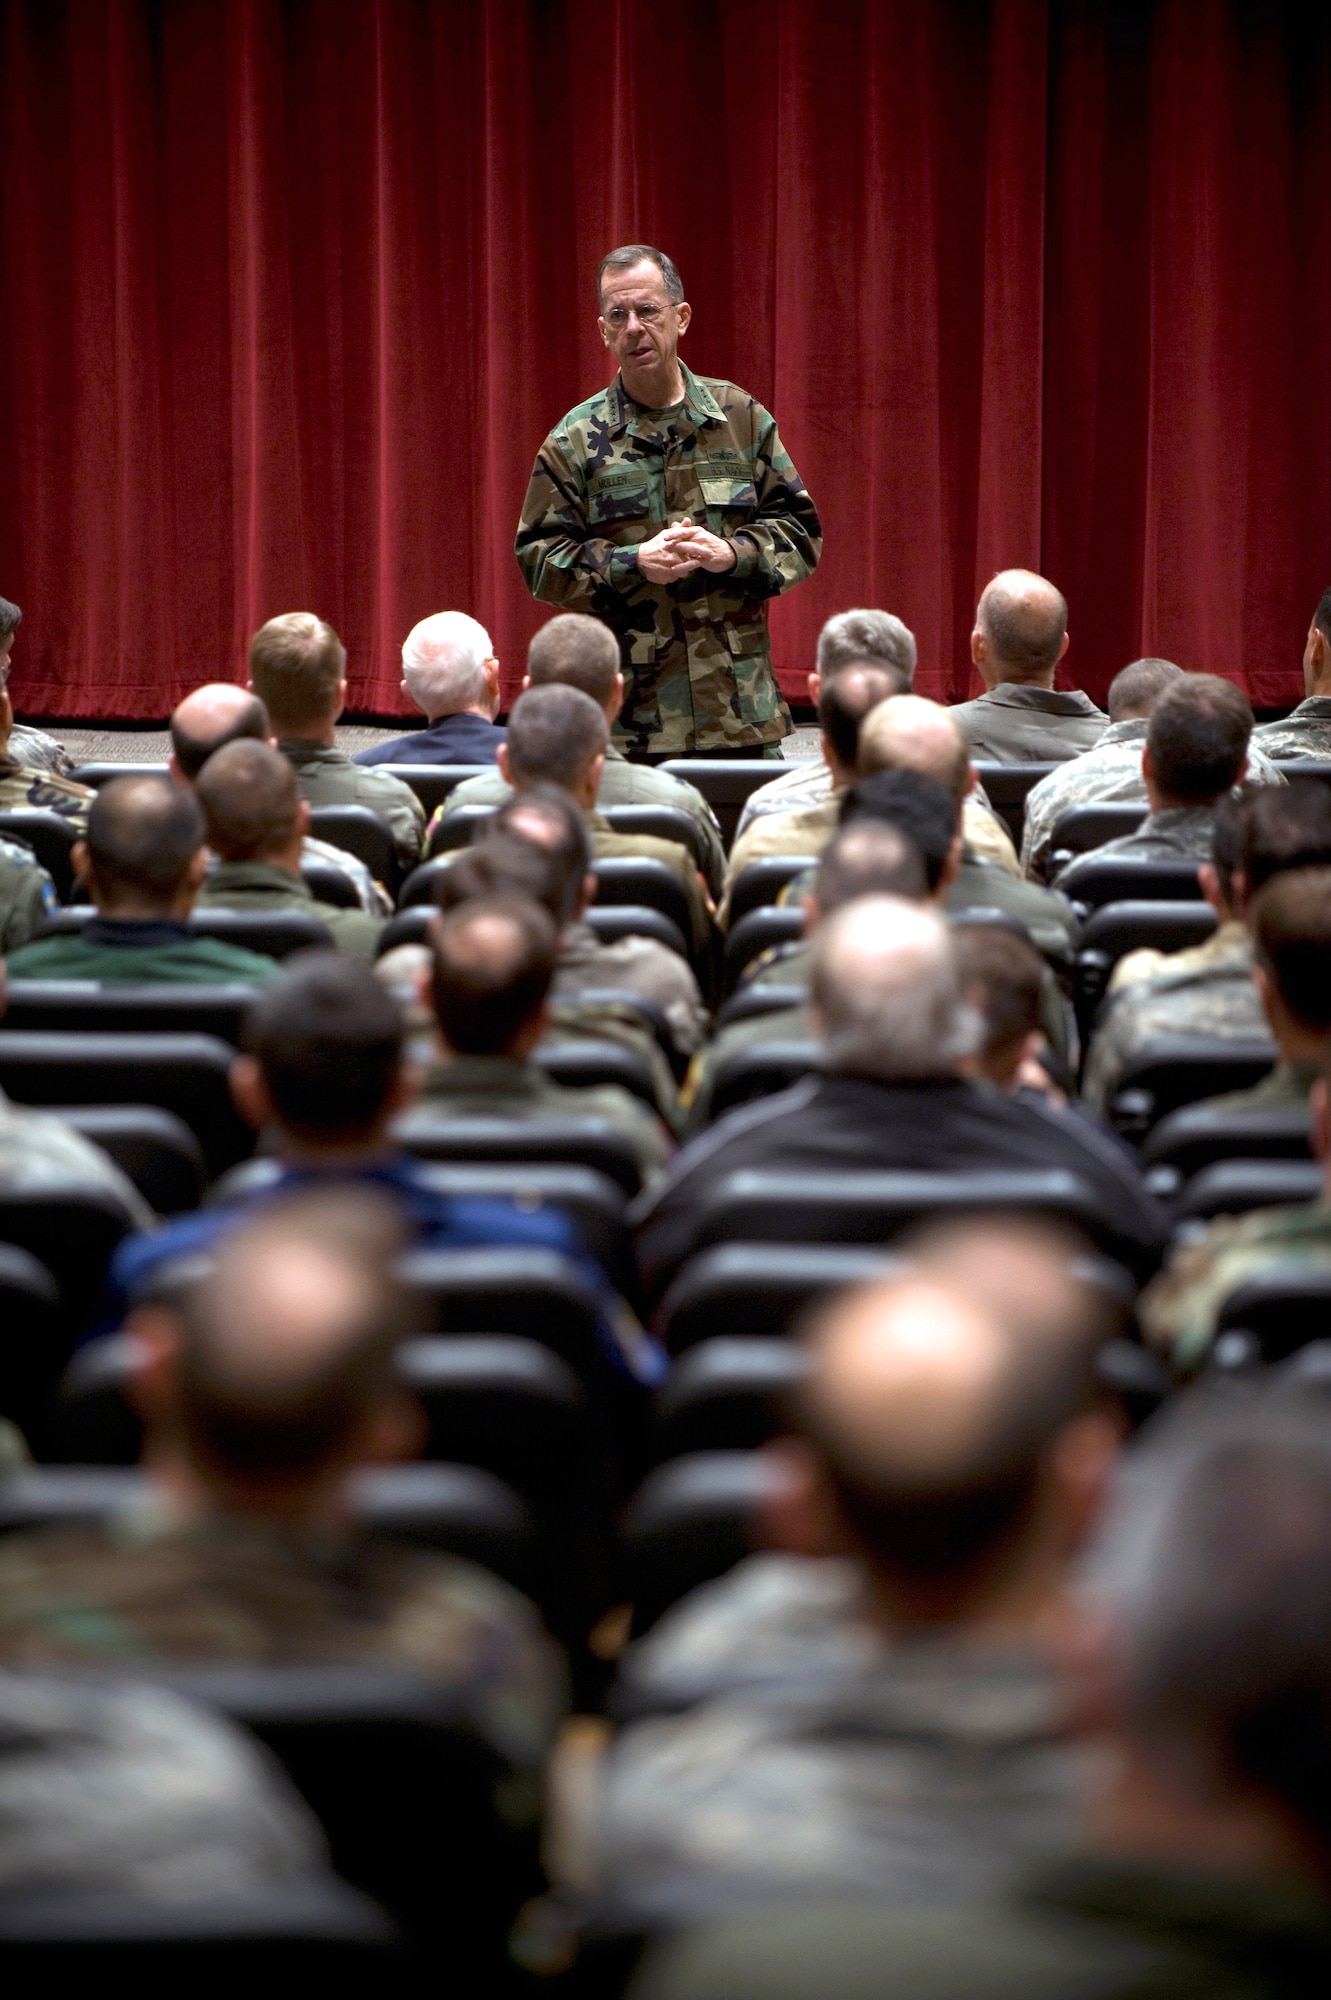 Navy Adm. Mike Mullen, chairman of the Joint Chiefs of Staff, addresses students assigned to the Air War College at Maxwell Air Force Base, Ala., on Oct. 28. (DoD photo by Navy Petty Officer 1st Class Chad J. McNeeley)